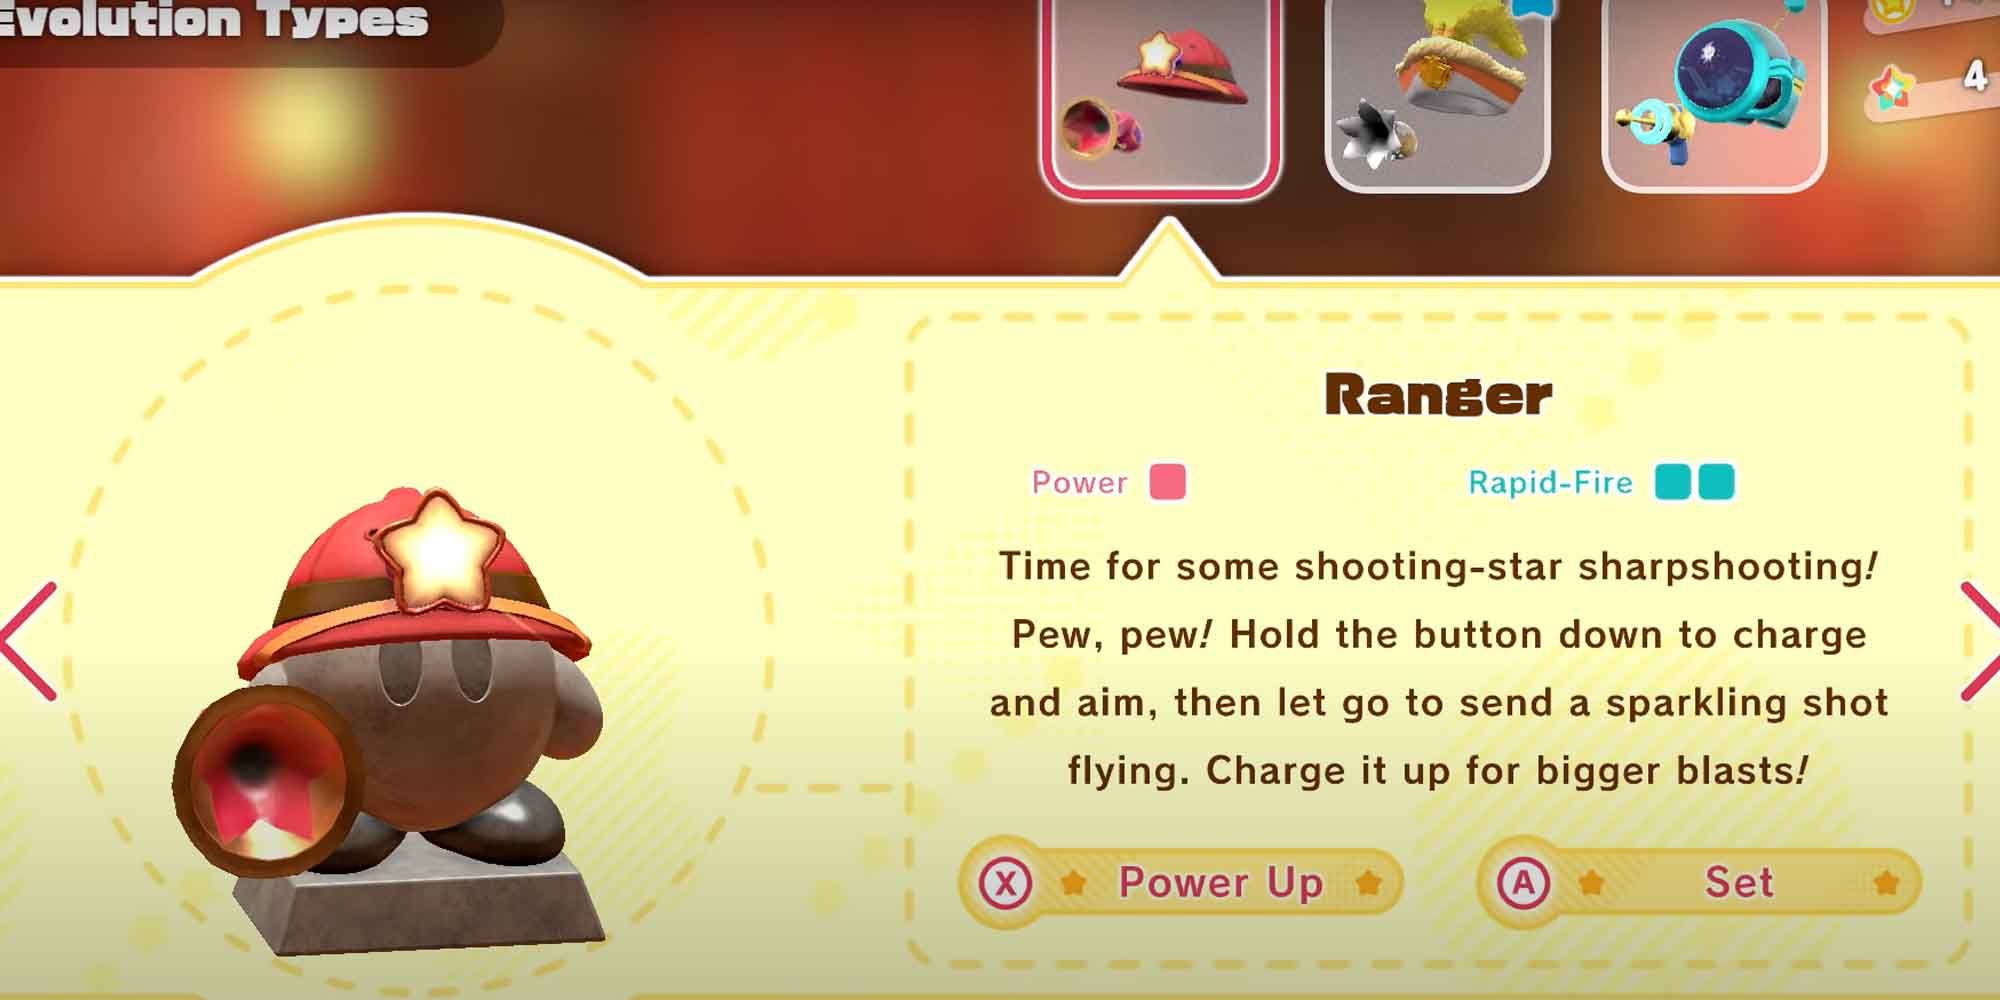 The Ranger copy ability in Kirby in The Forgotten Land